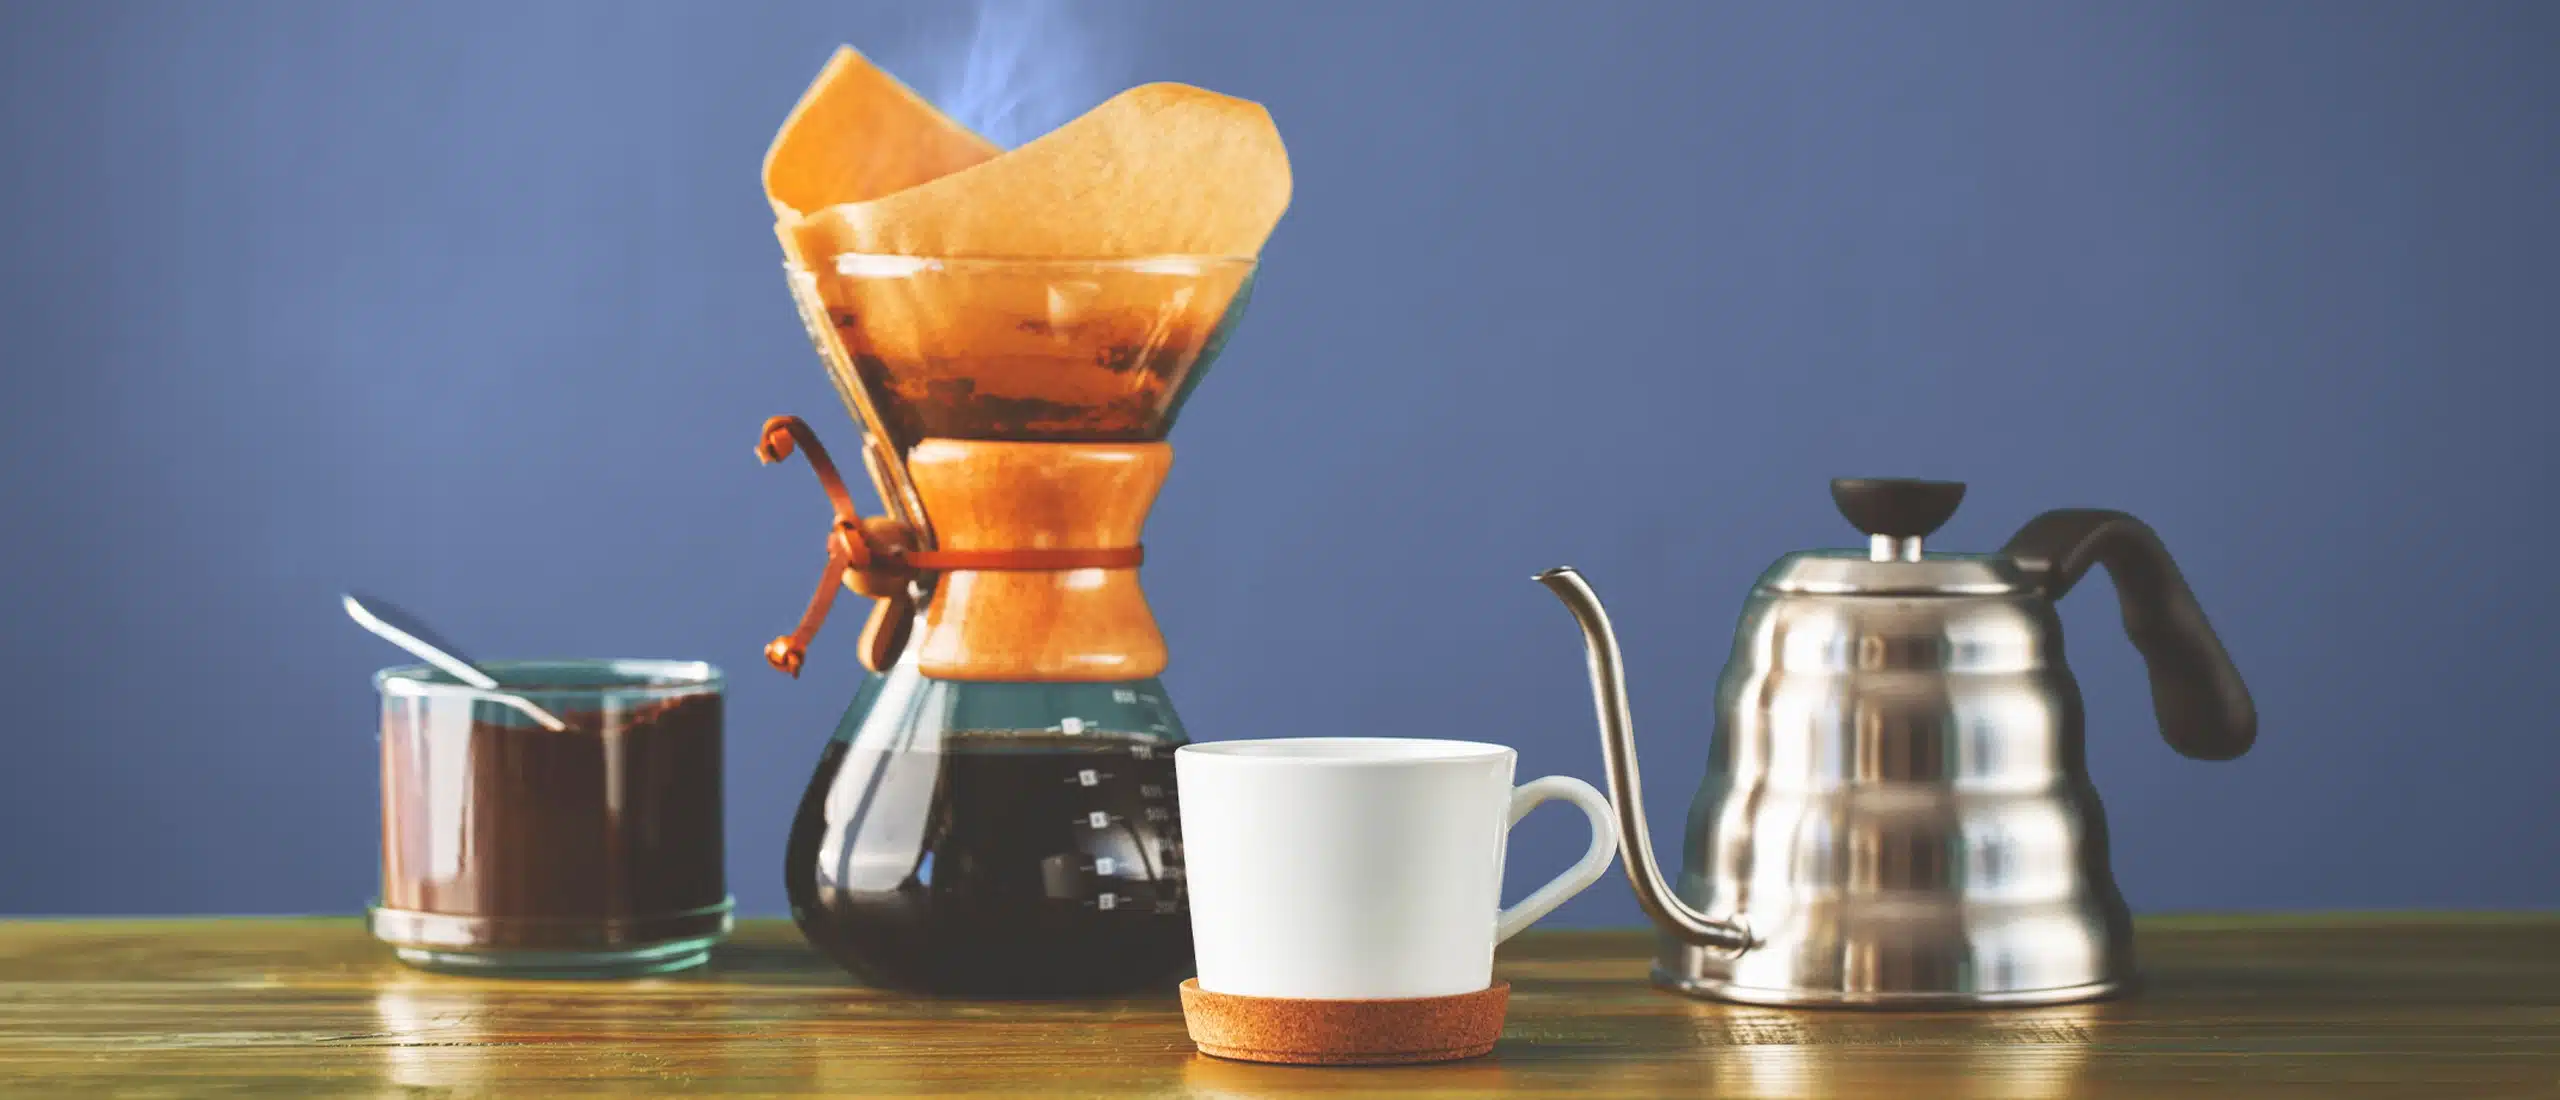 The 17 Best Plastic Free Coffee Makers